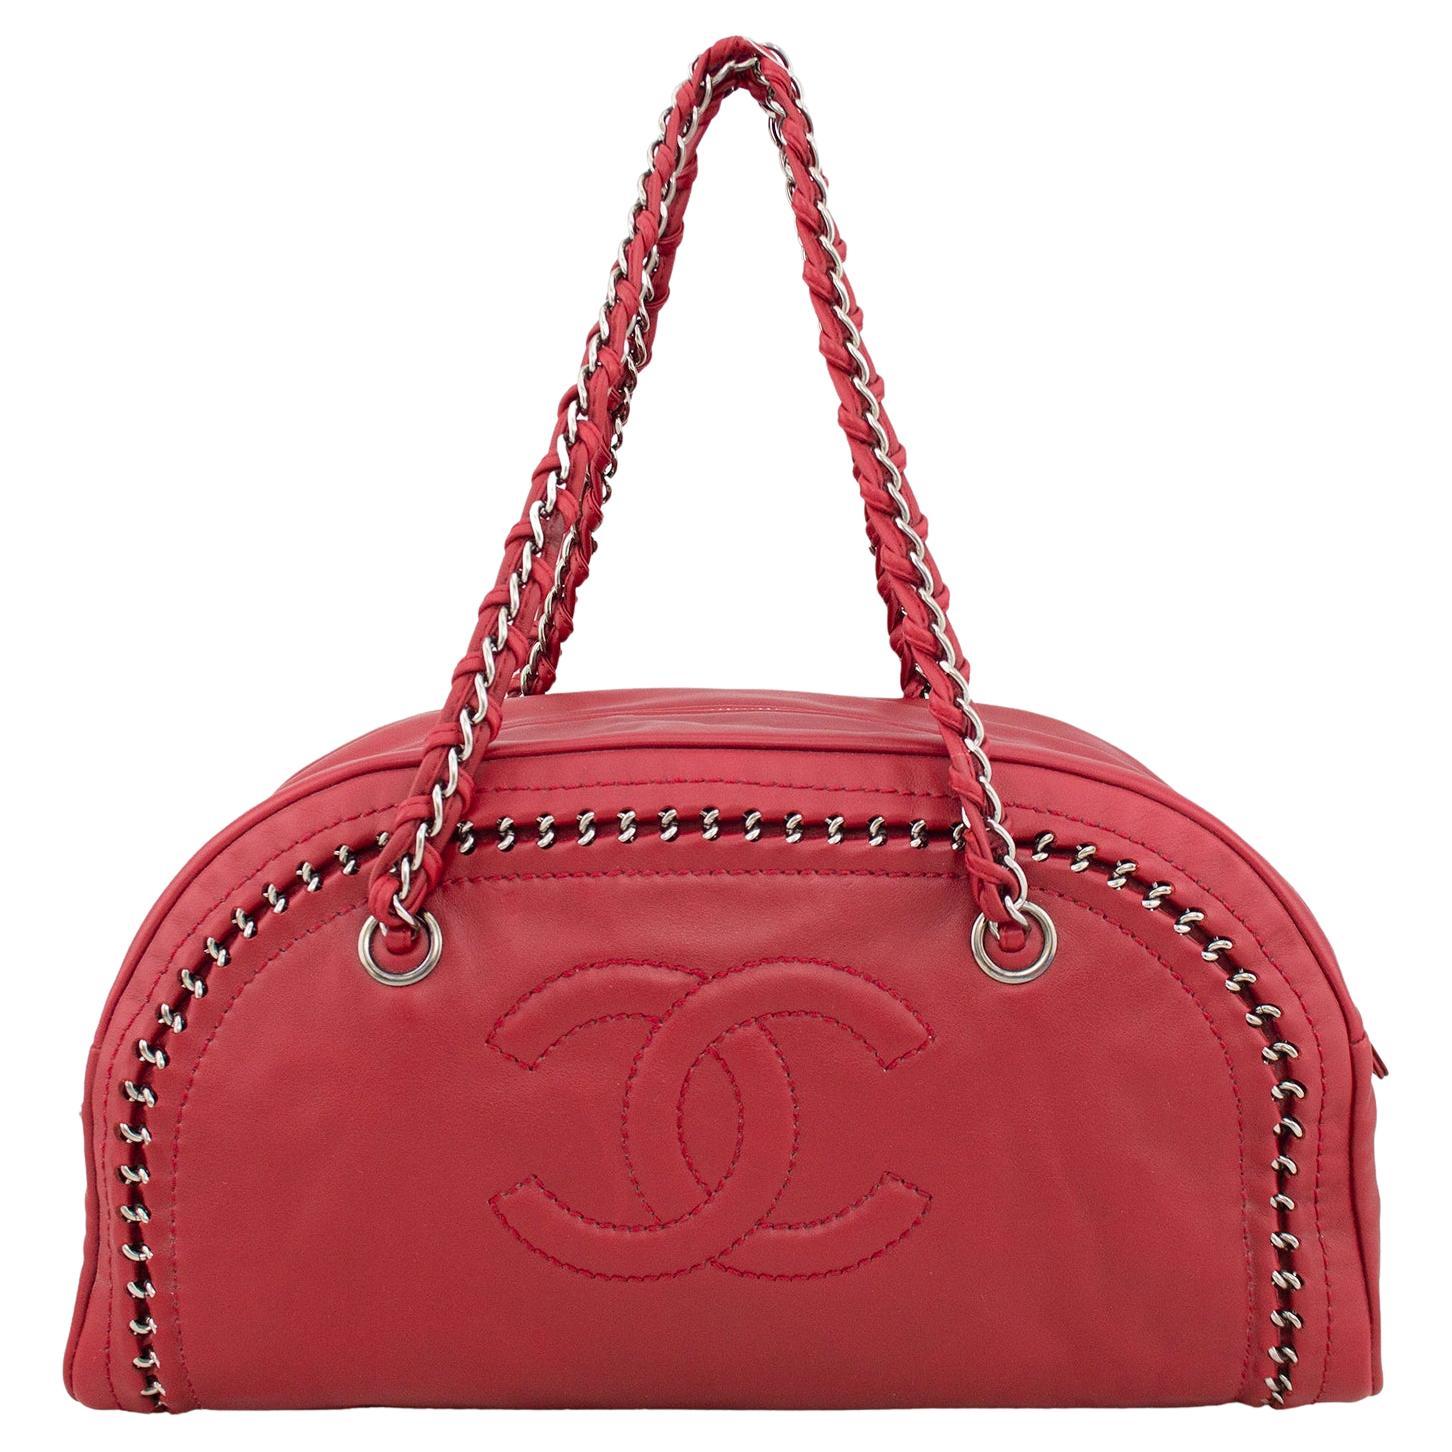 2006 Chanel by Karl Lagerfeld Raspberry Leather Luxe Ligne Bowler Bag